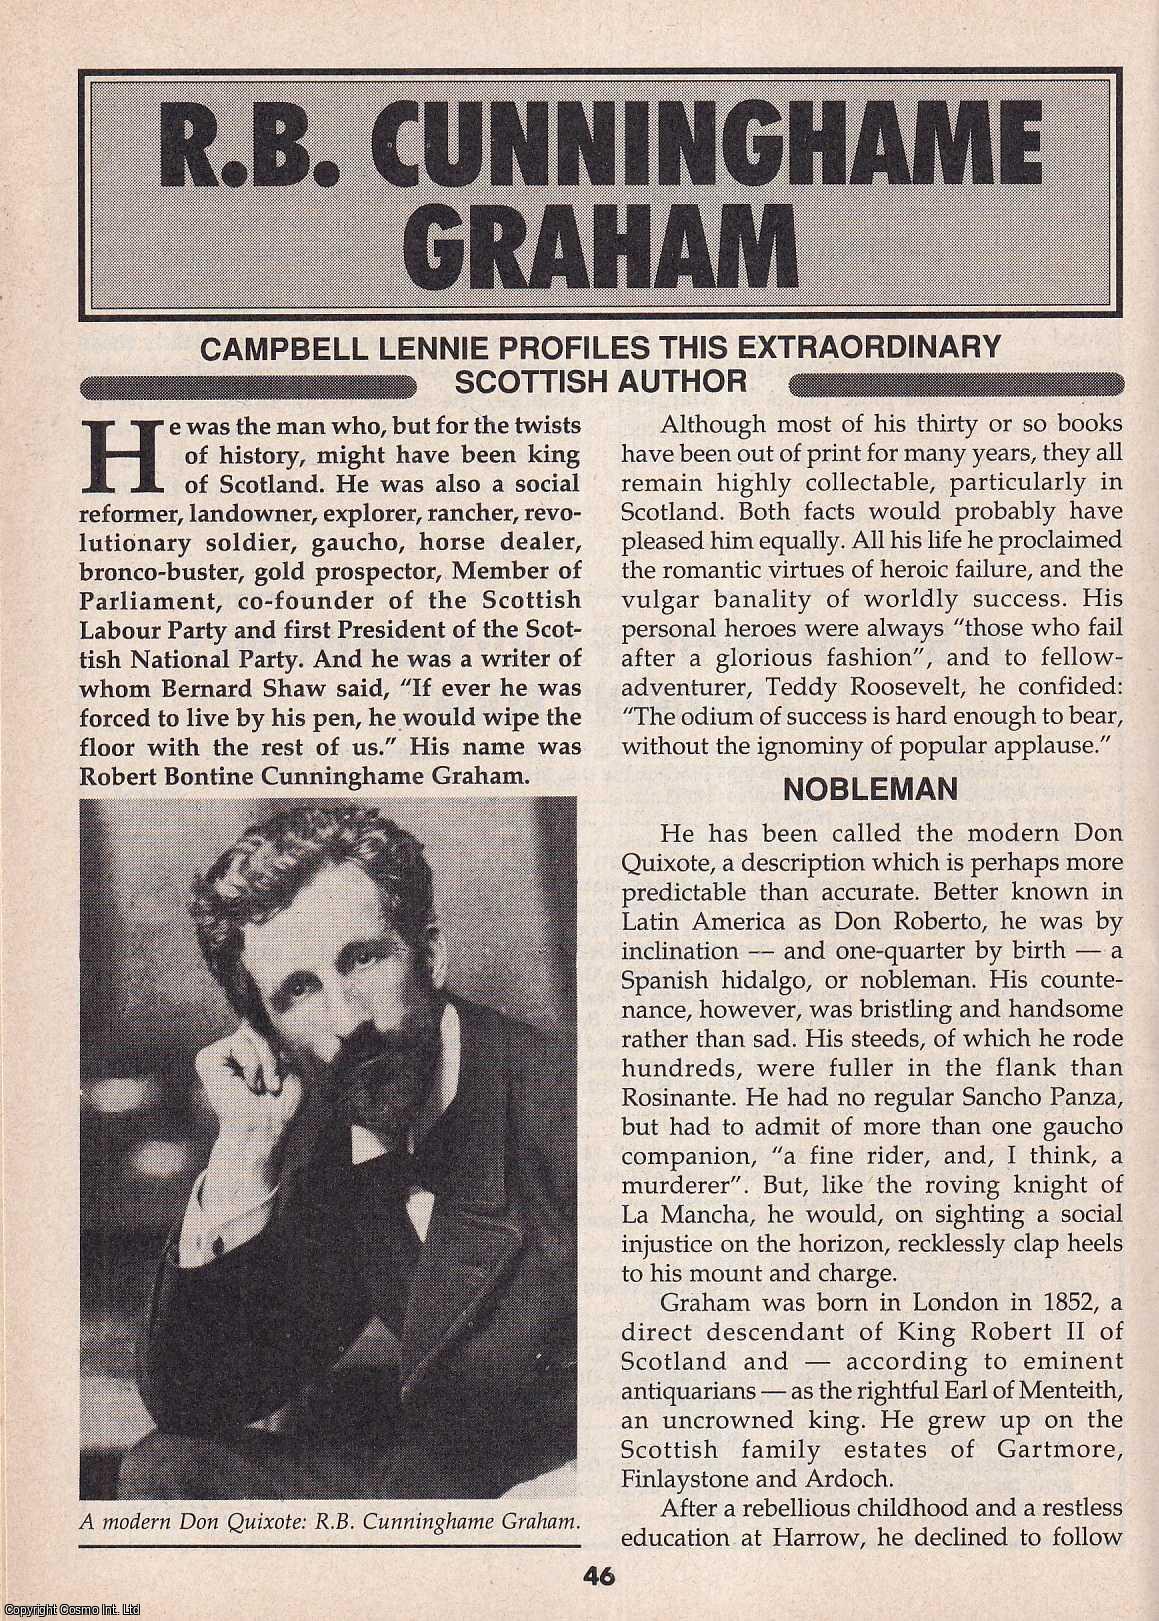 Campbell Lennie - R.B. Cunninghame Graham : Extraordinary Scottish Author. This is an original article separated from an issue of The Book & Magazine Collector publication, 1995.